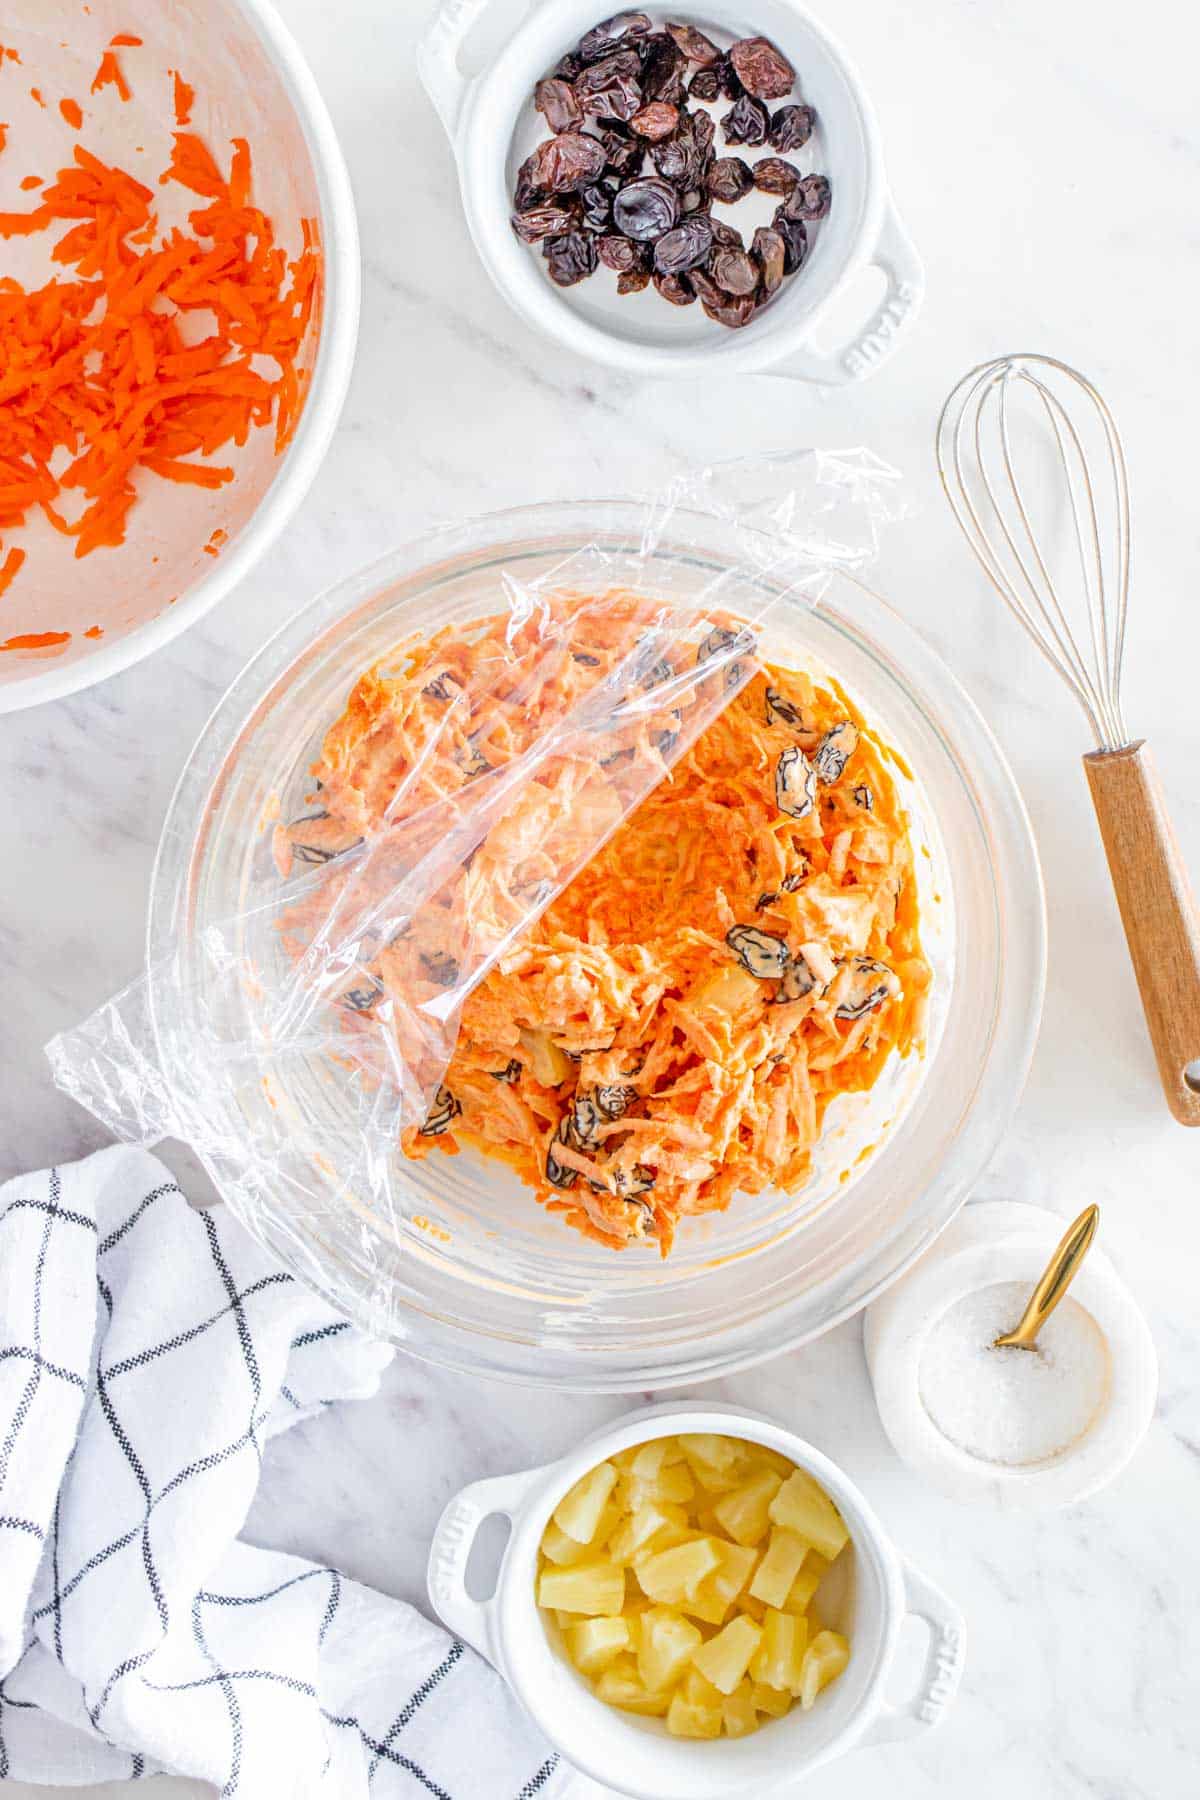 A bowl of carrot raisin salad with plastic wrap.